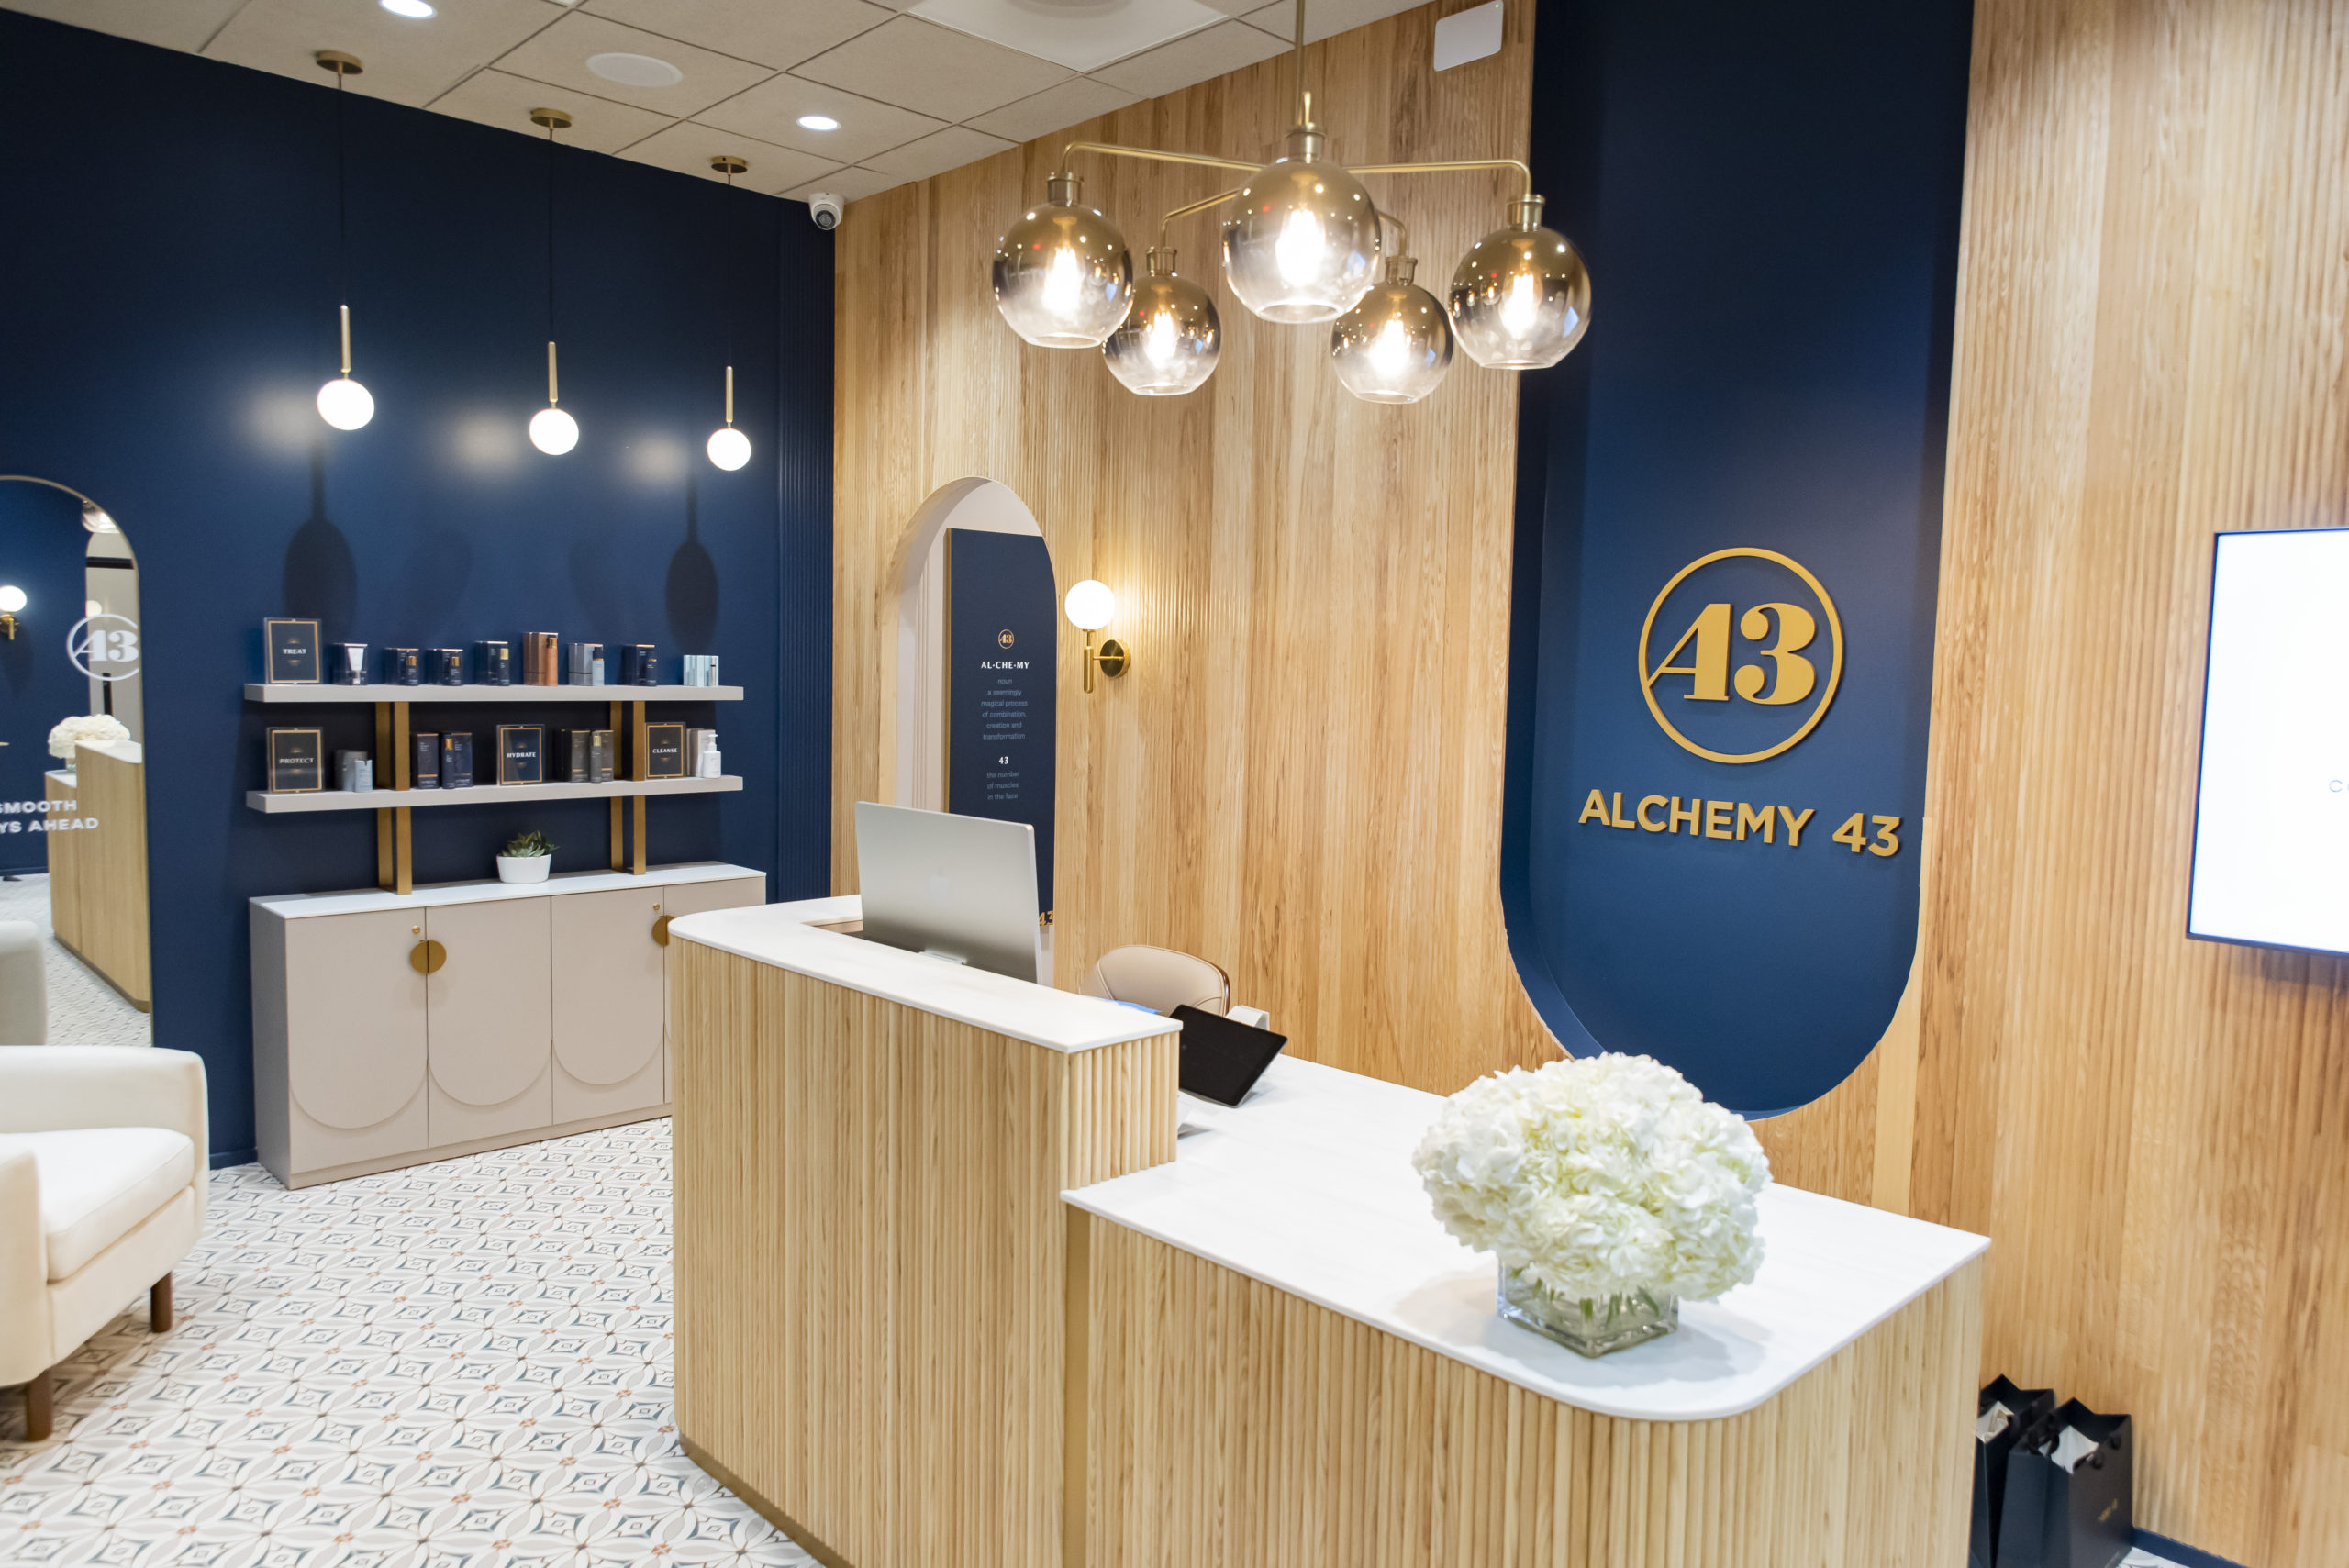 Alchemy 43 to Double in Size in ’23